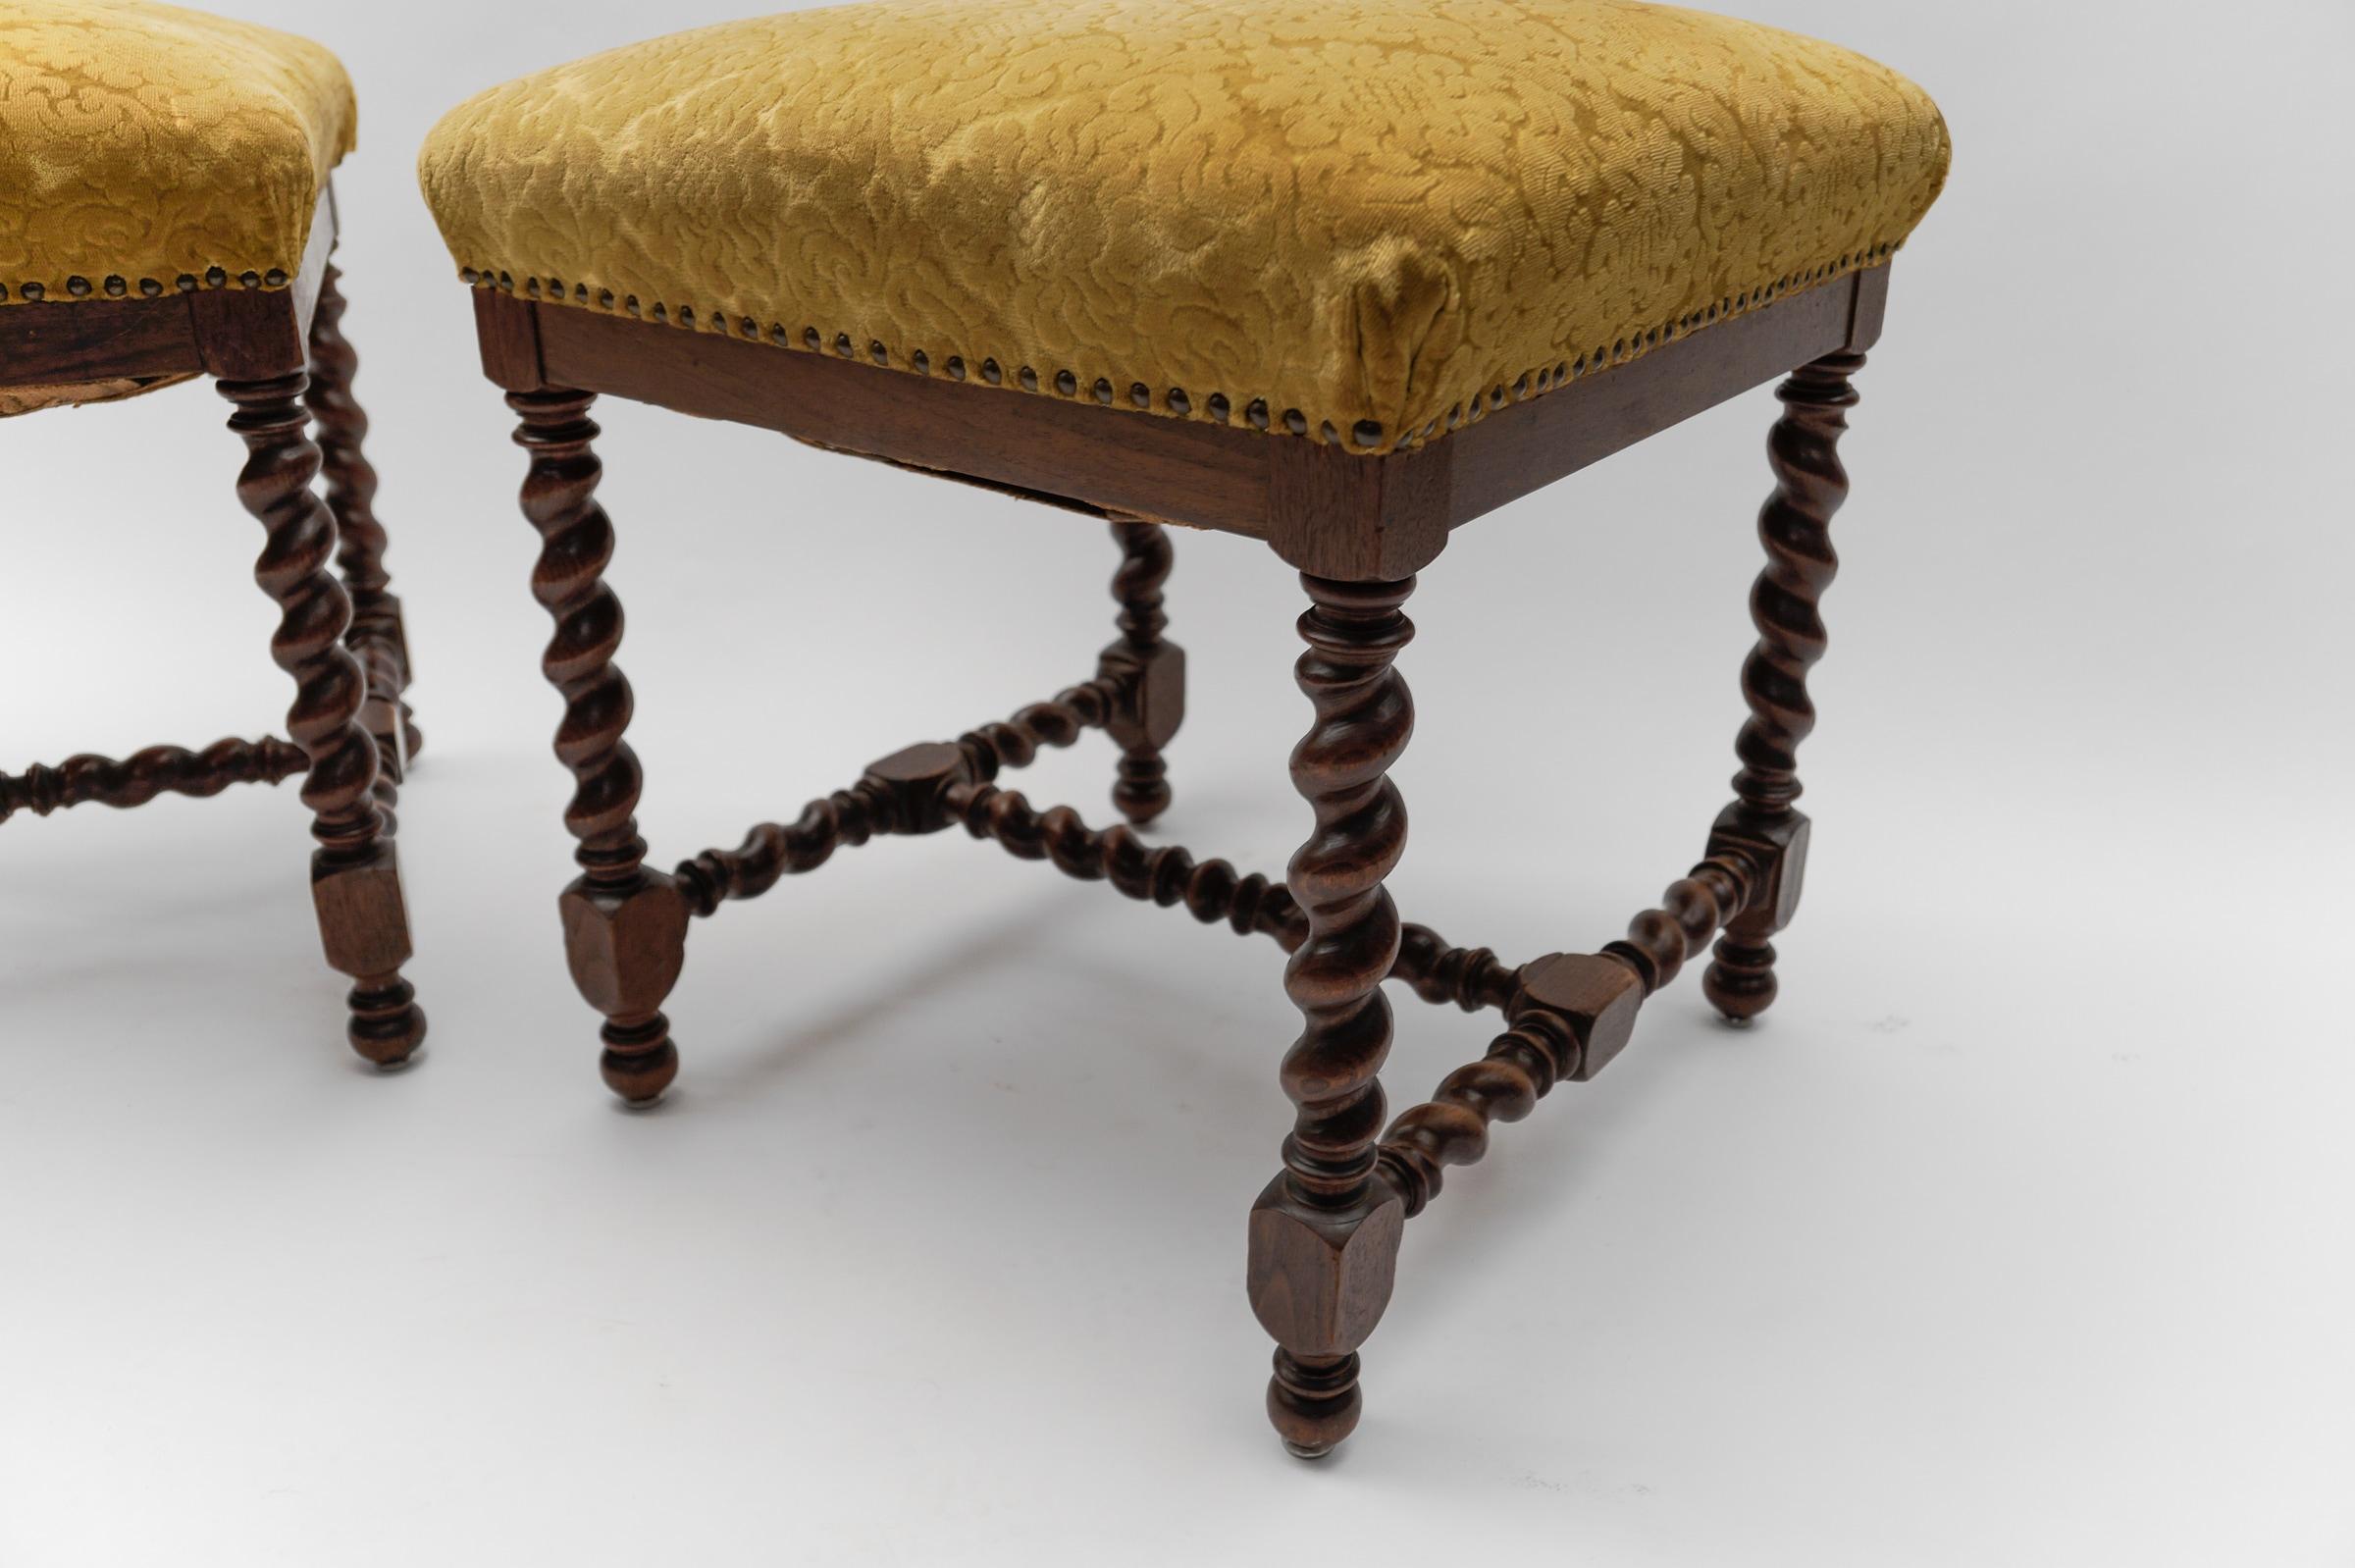 Two French Barley Wood Stools in Louis XIII Style, ca. 1870s For Sale 6